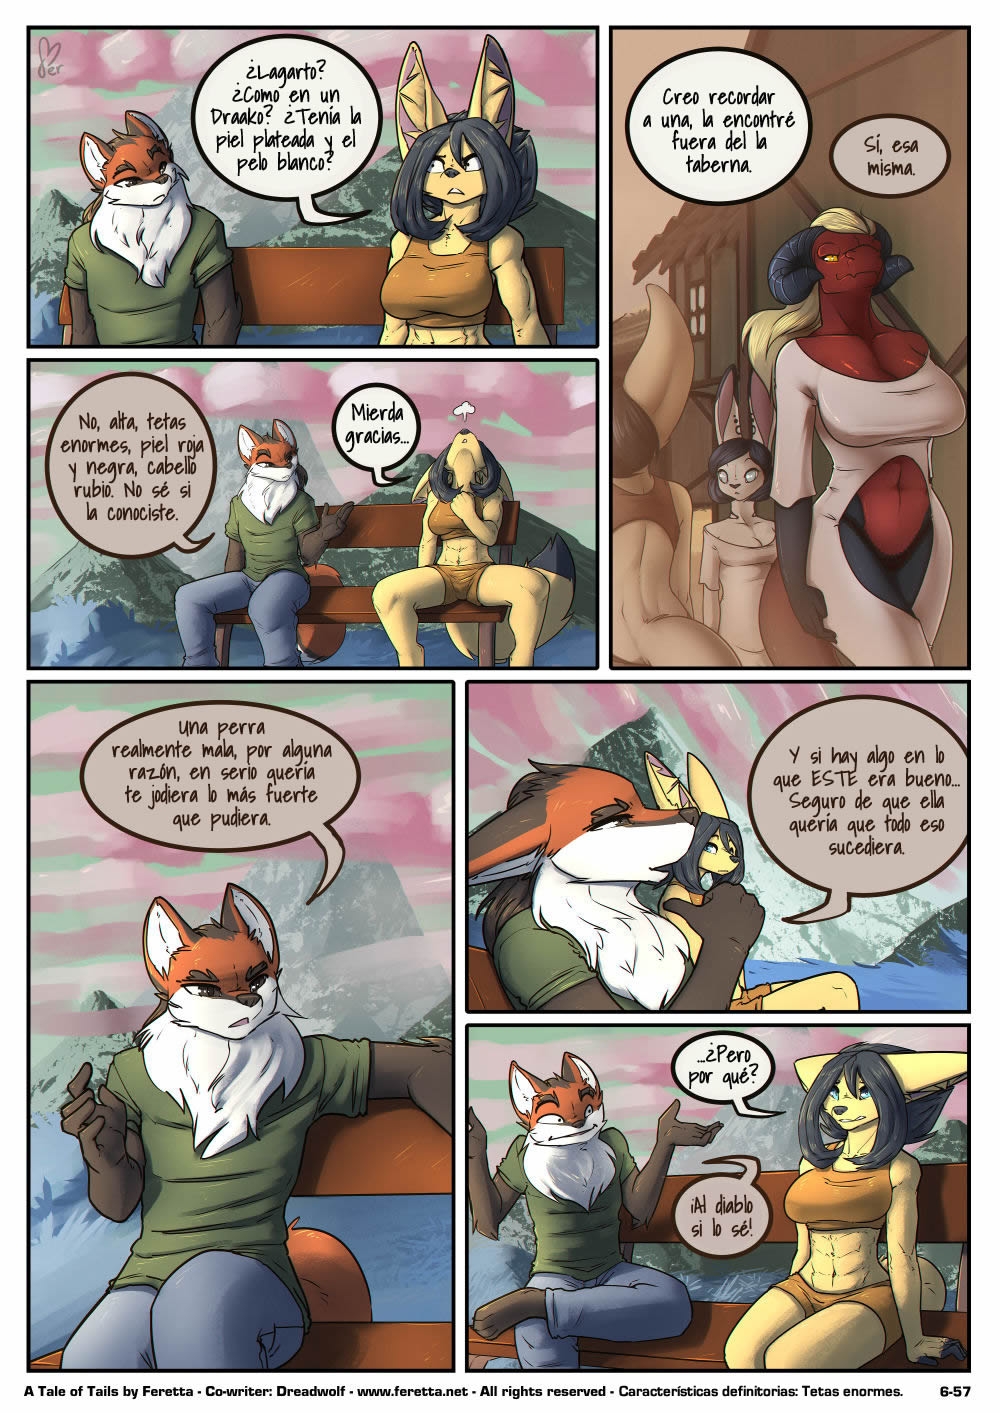 [Feretta] A Tale of Tails: Chapter 6 - Paths converge / Los caminos convergen [Spanish] [Red Fox Makkan] 57